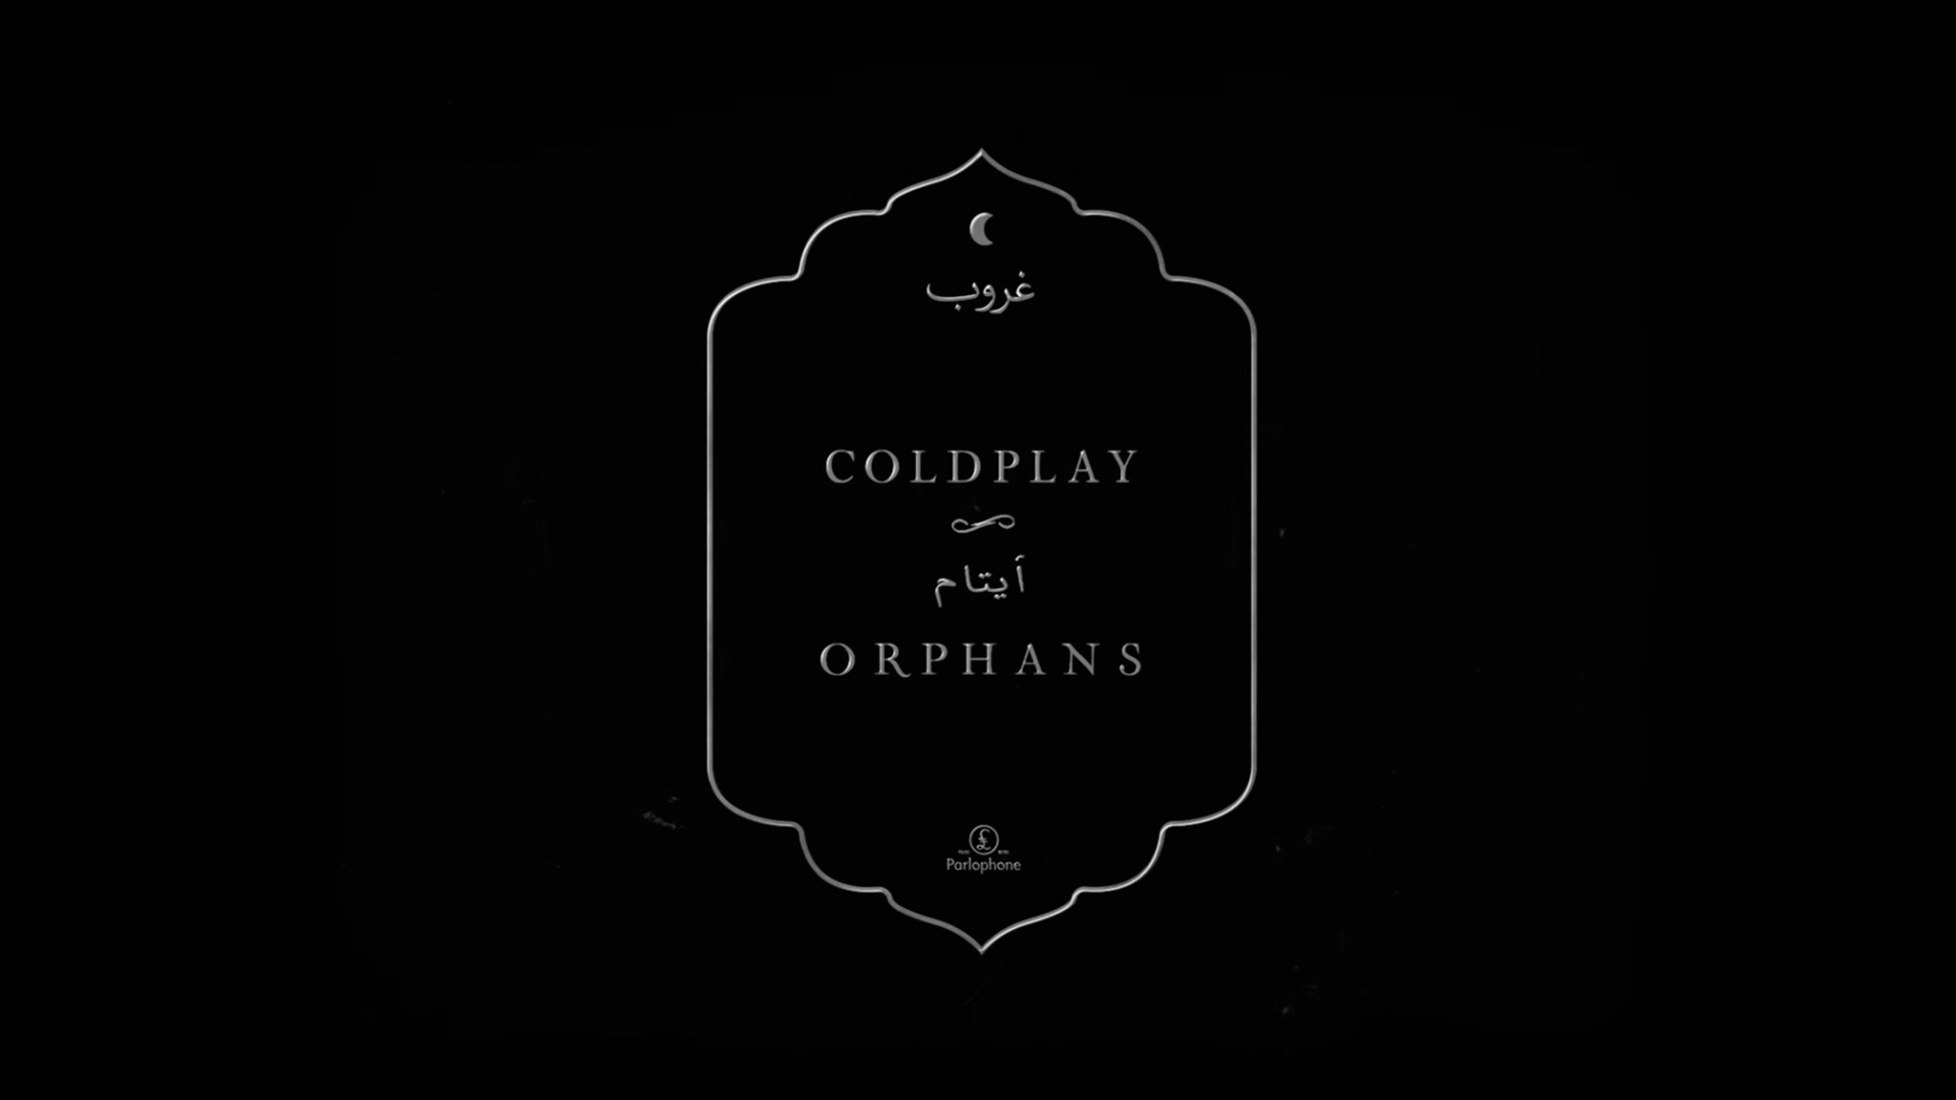 From Everyday Life. Orphans by Coldplay